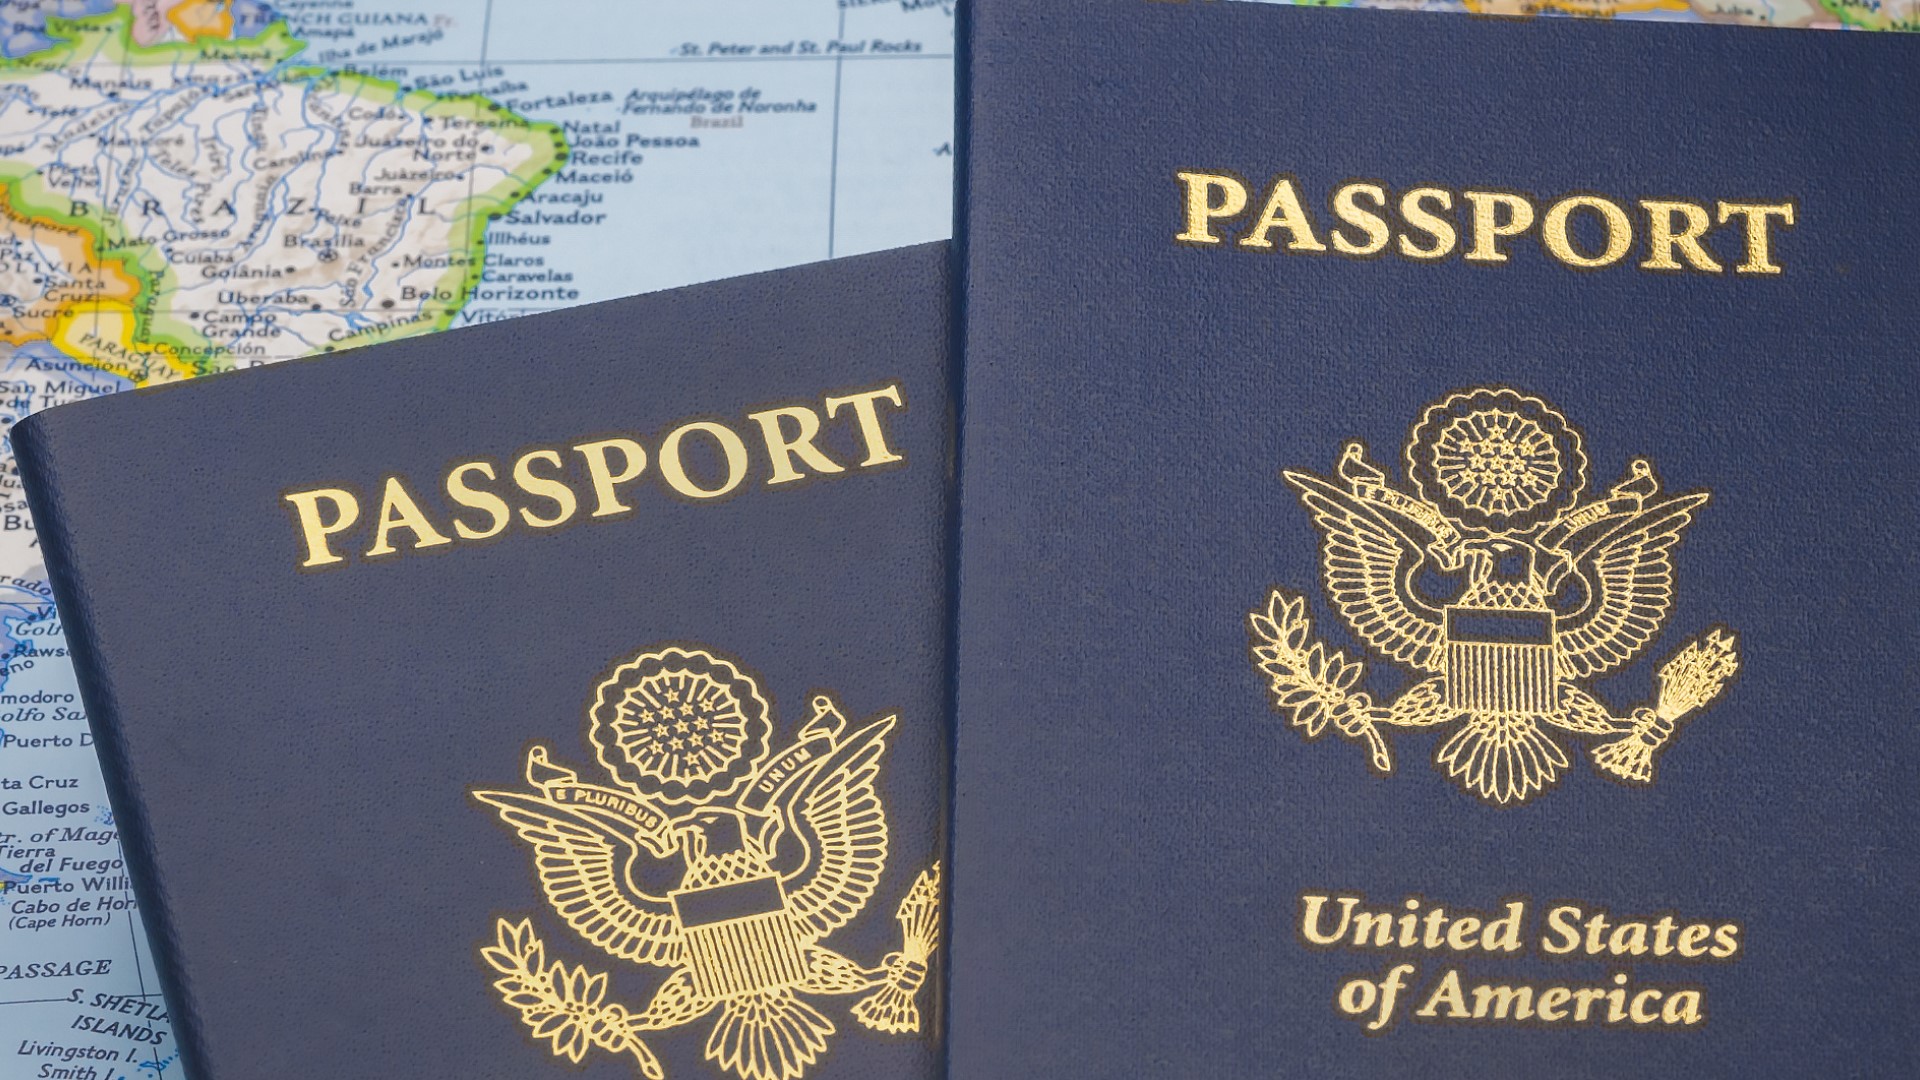 The U.S. Department of State has two million passport applications in the pipeline, creating delays and long wait times.